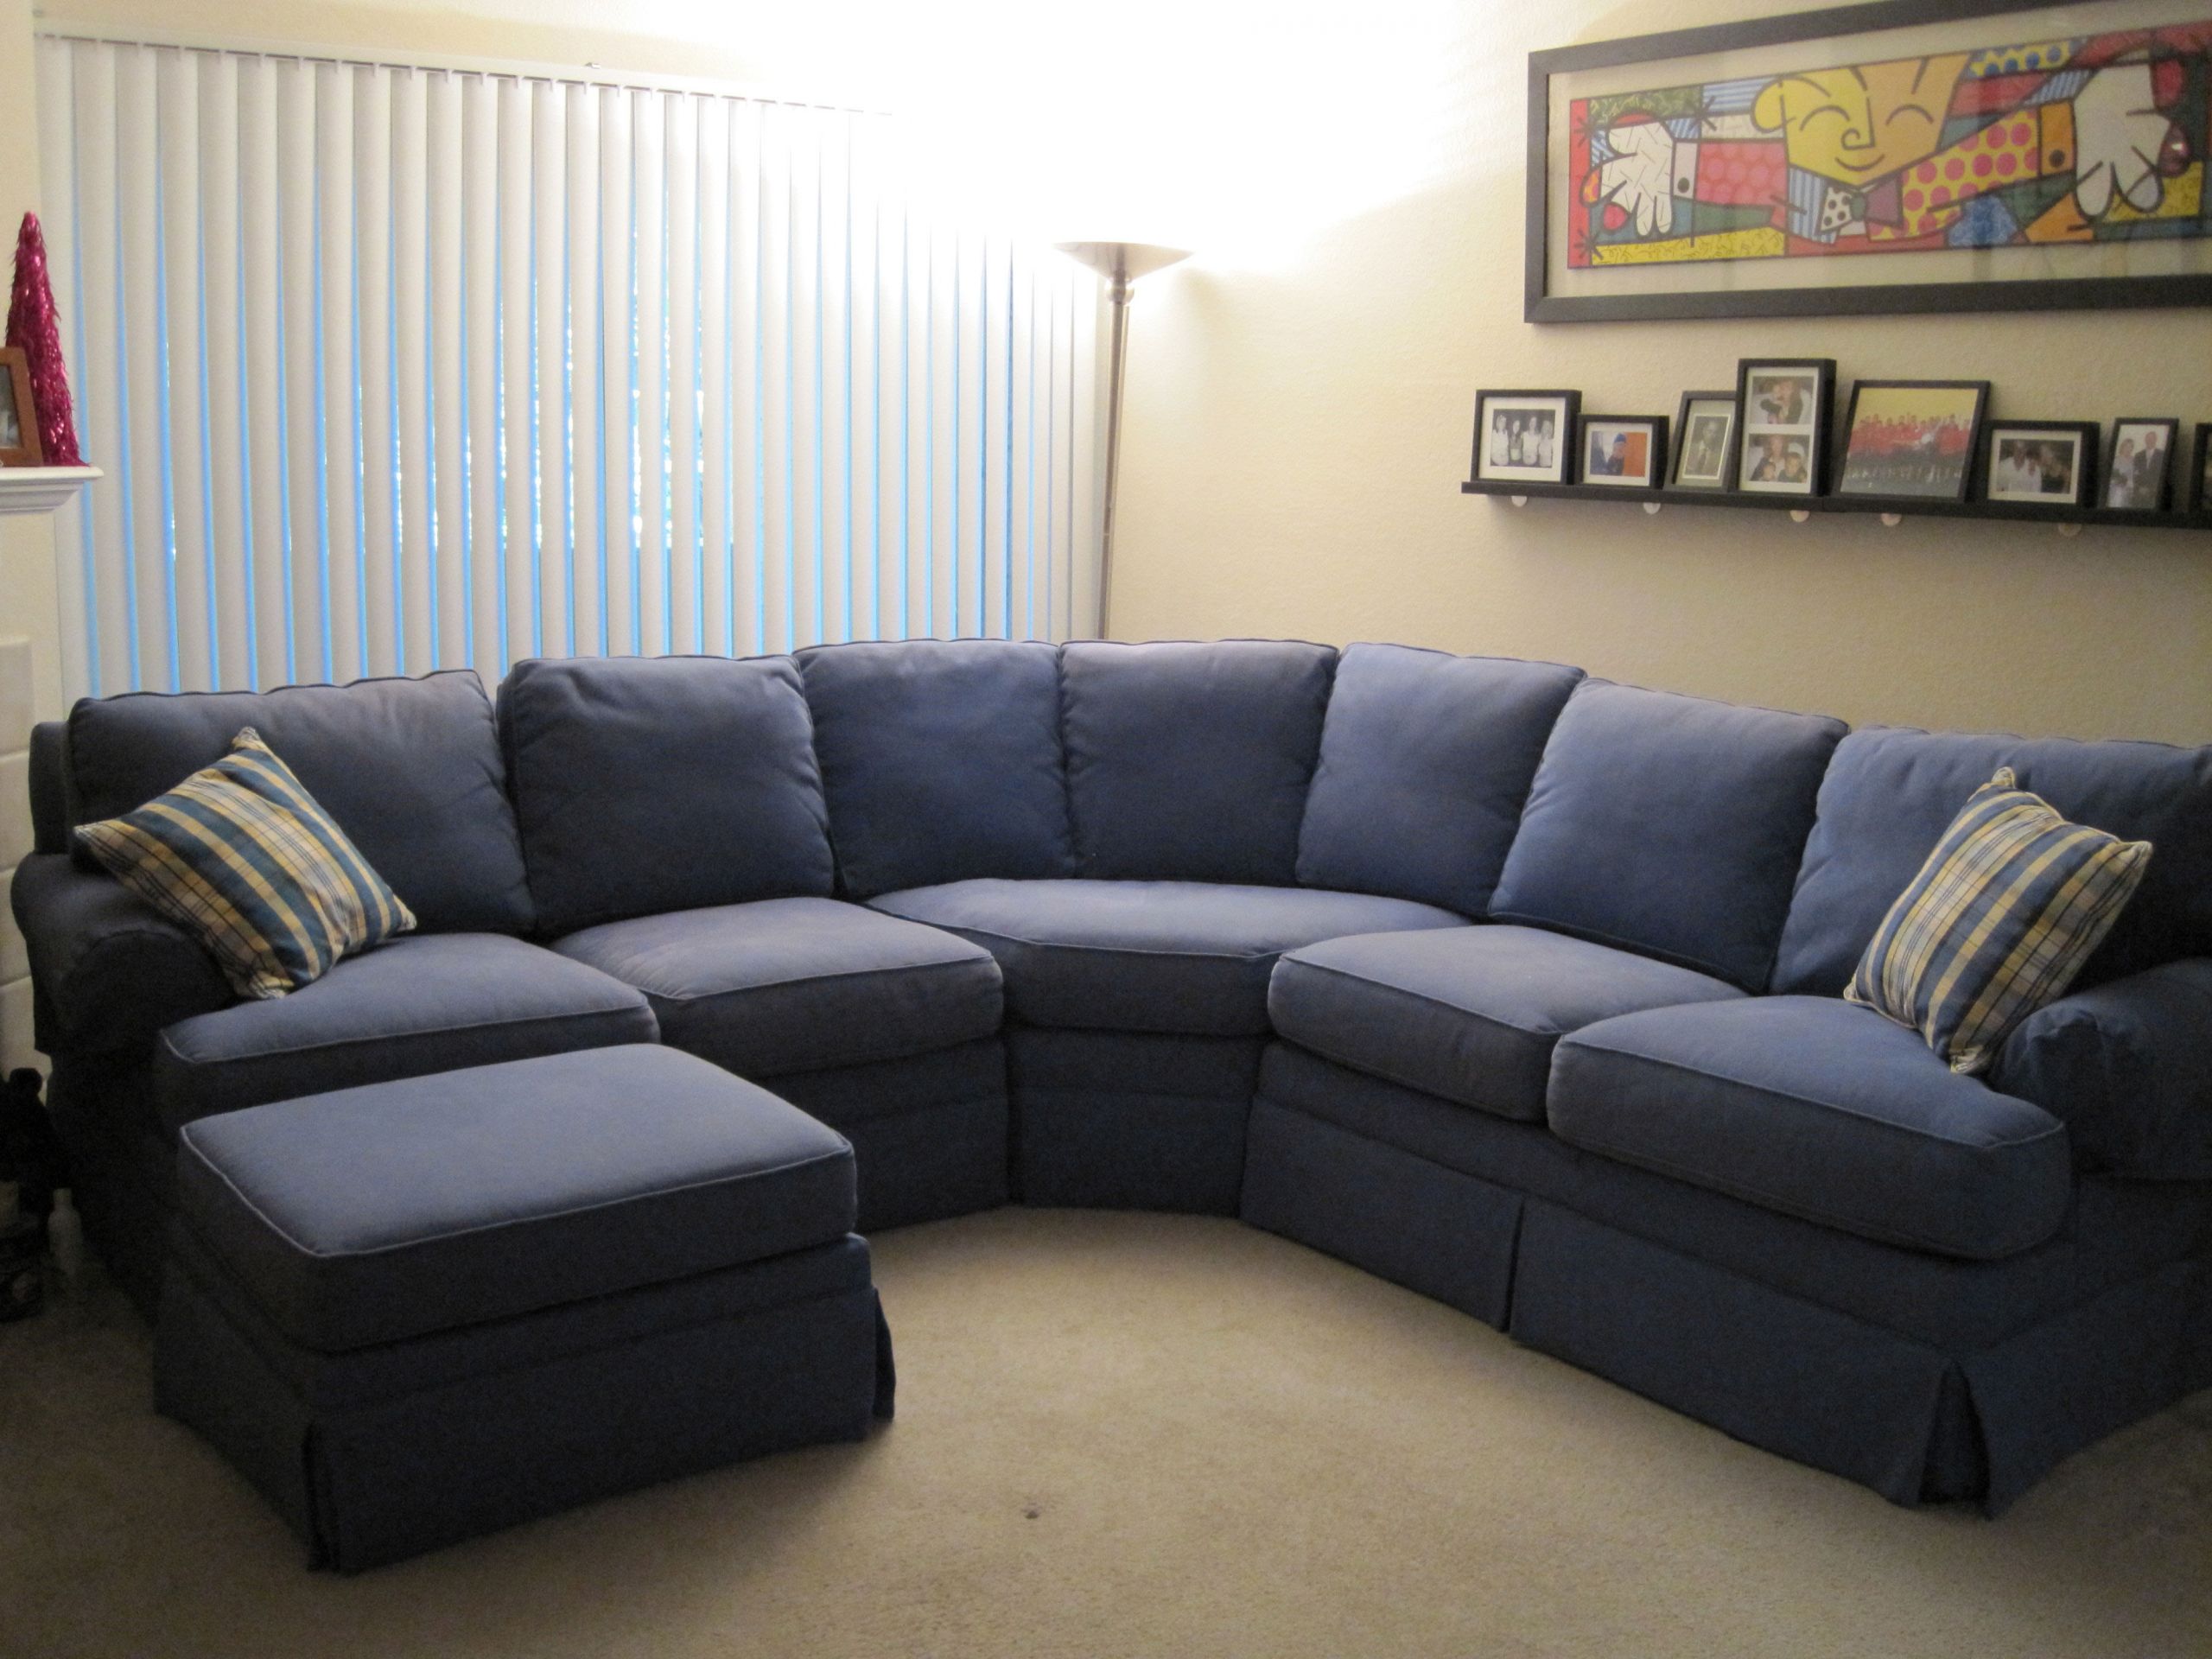 Small Living Room With Sectional
 Living Rooms with Sectionals Sofa for Small Living Room